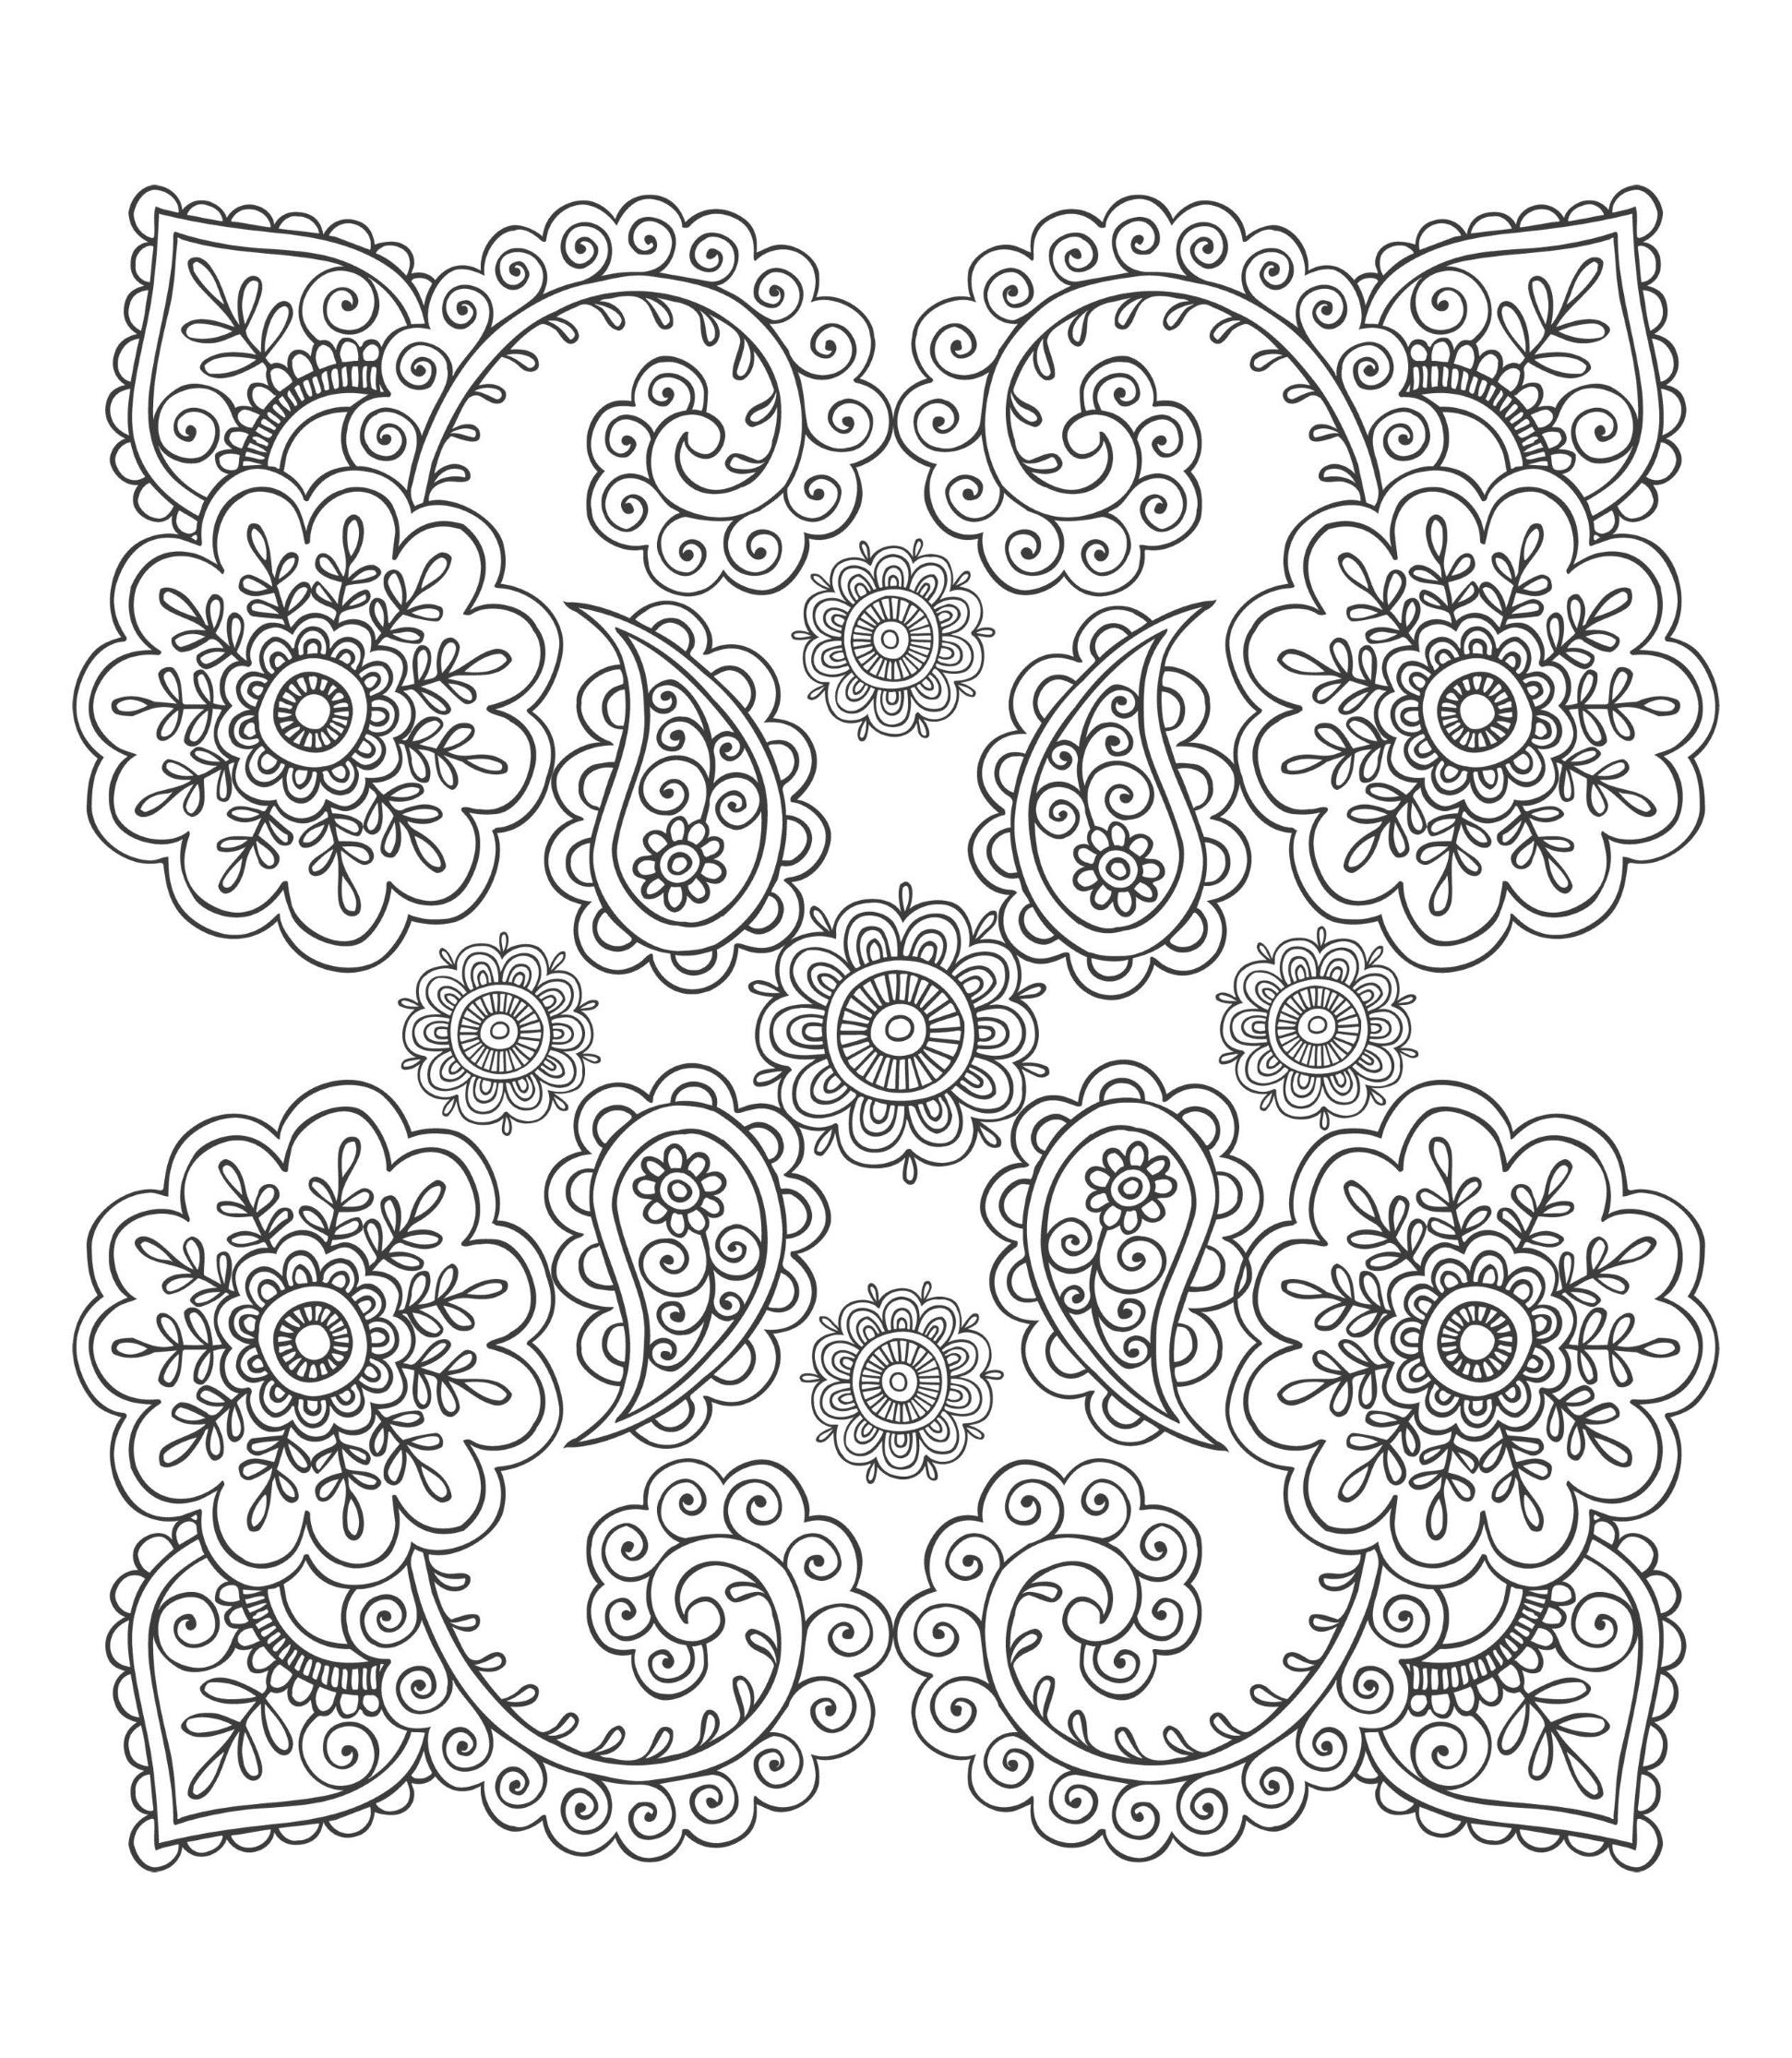 Flowers and Paisley patterns to color, if you like symmetry